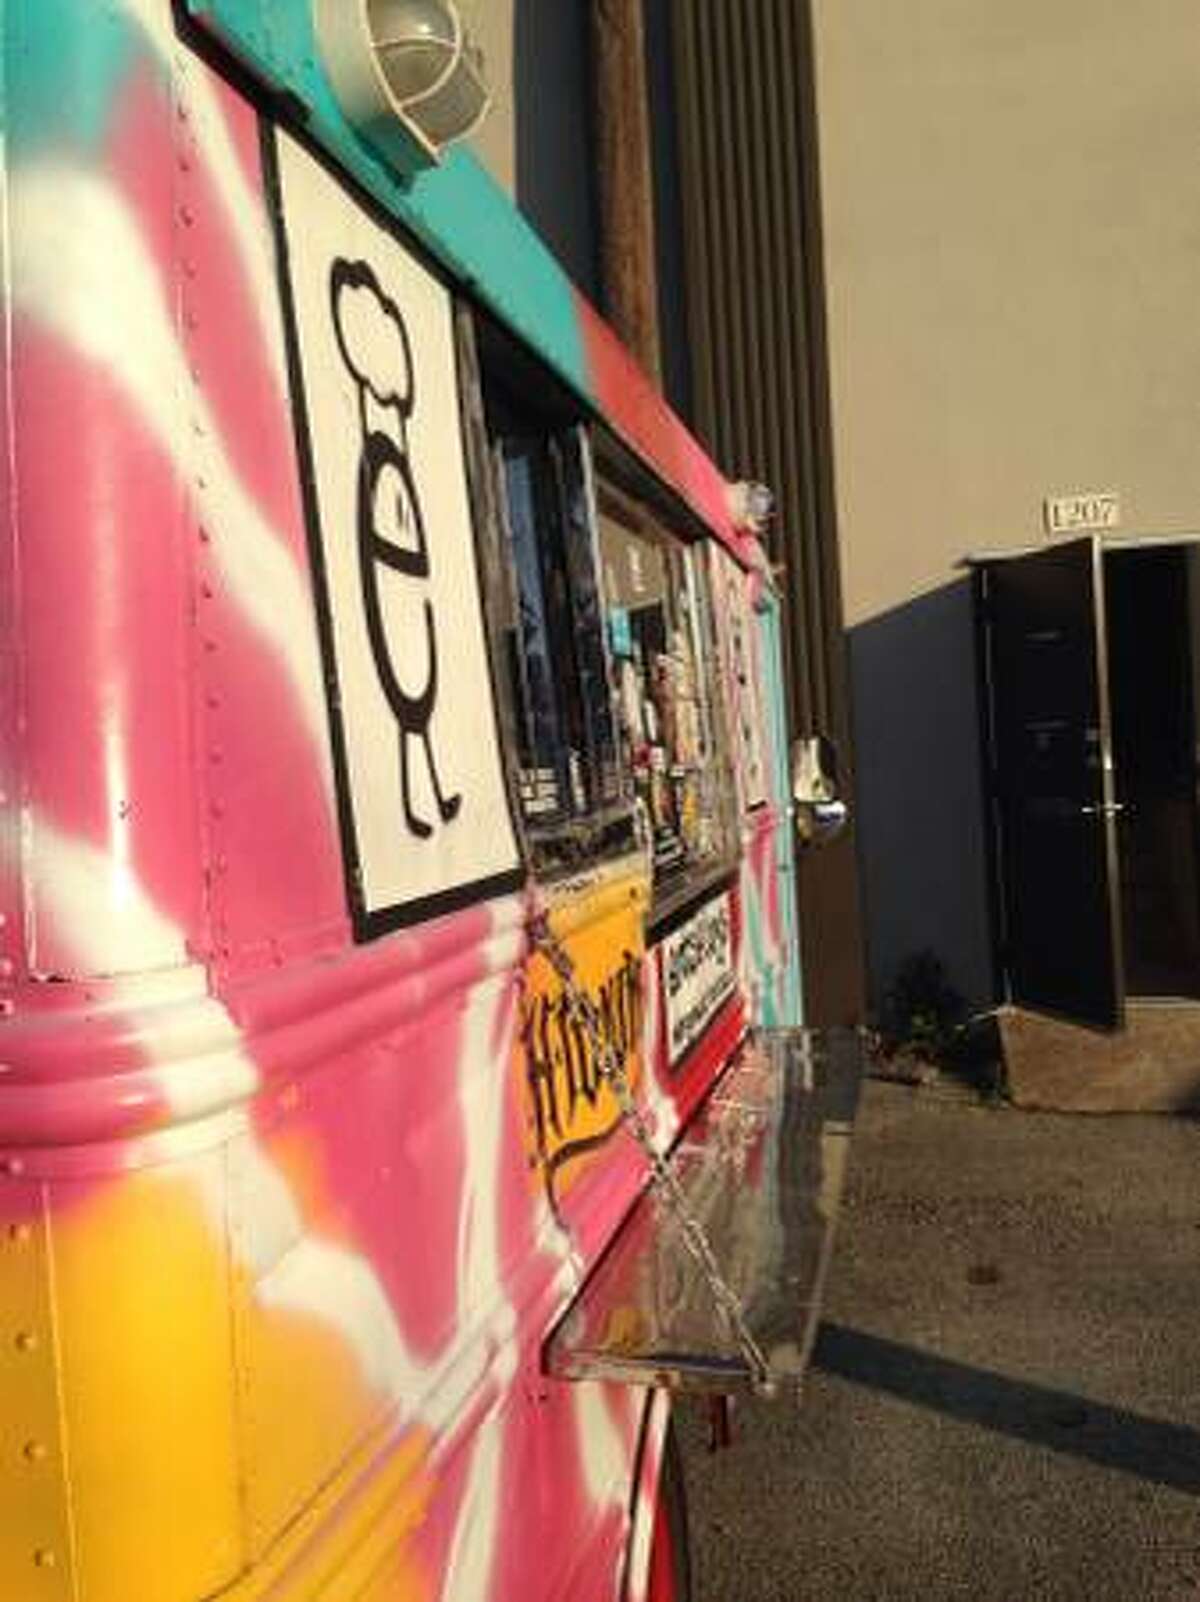 One of the most successful Houston food trucks is now for sale. The original Eatsie Boys food truck, a 1992 GMC school bus converted into a full-functional rolling kitchen, is now for sale on Craigslist. Eatsie Boys co-owner Matt Marcus put the ad online late Monday evening. The bus is listed at $16,500. That price gets you a stainless steel kitchen including two sinks, a freezer, prep areas, a propane generator, a speed rack, outdoor lighting, fresh water and gray water tanks, a water, pump, and a 36-inch flat top griddle. All on four wheels.